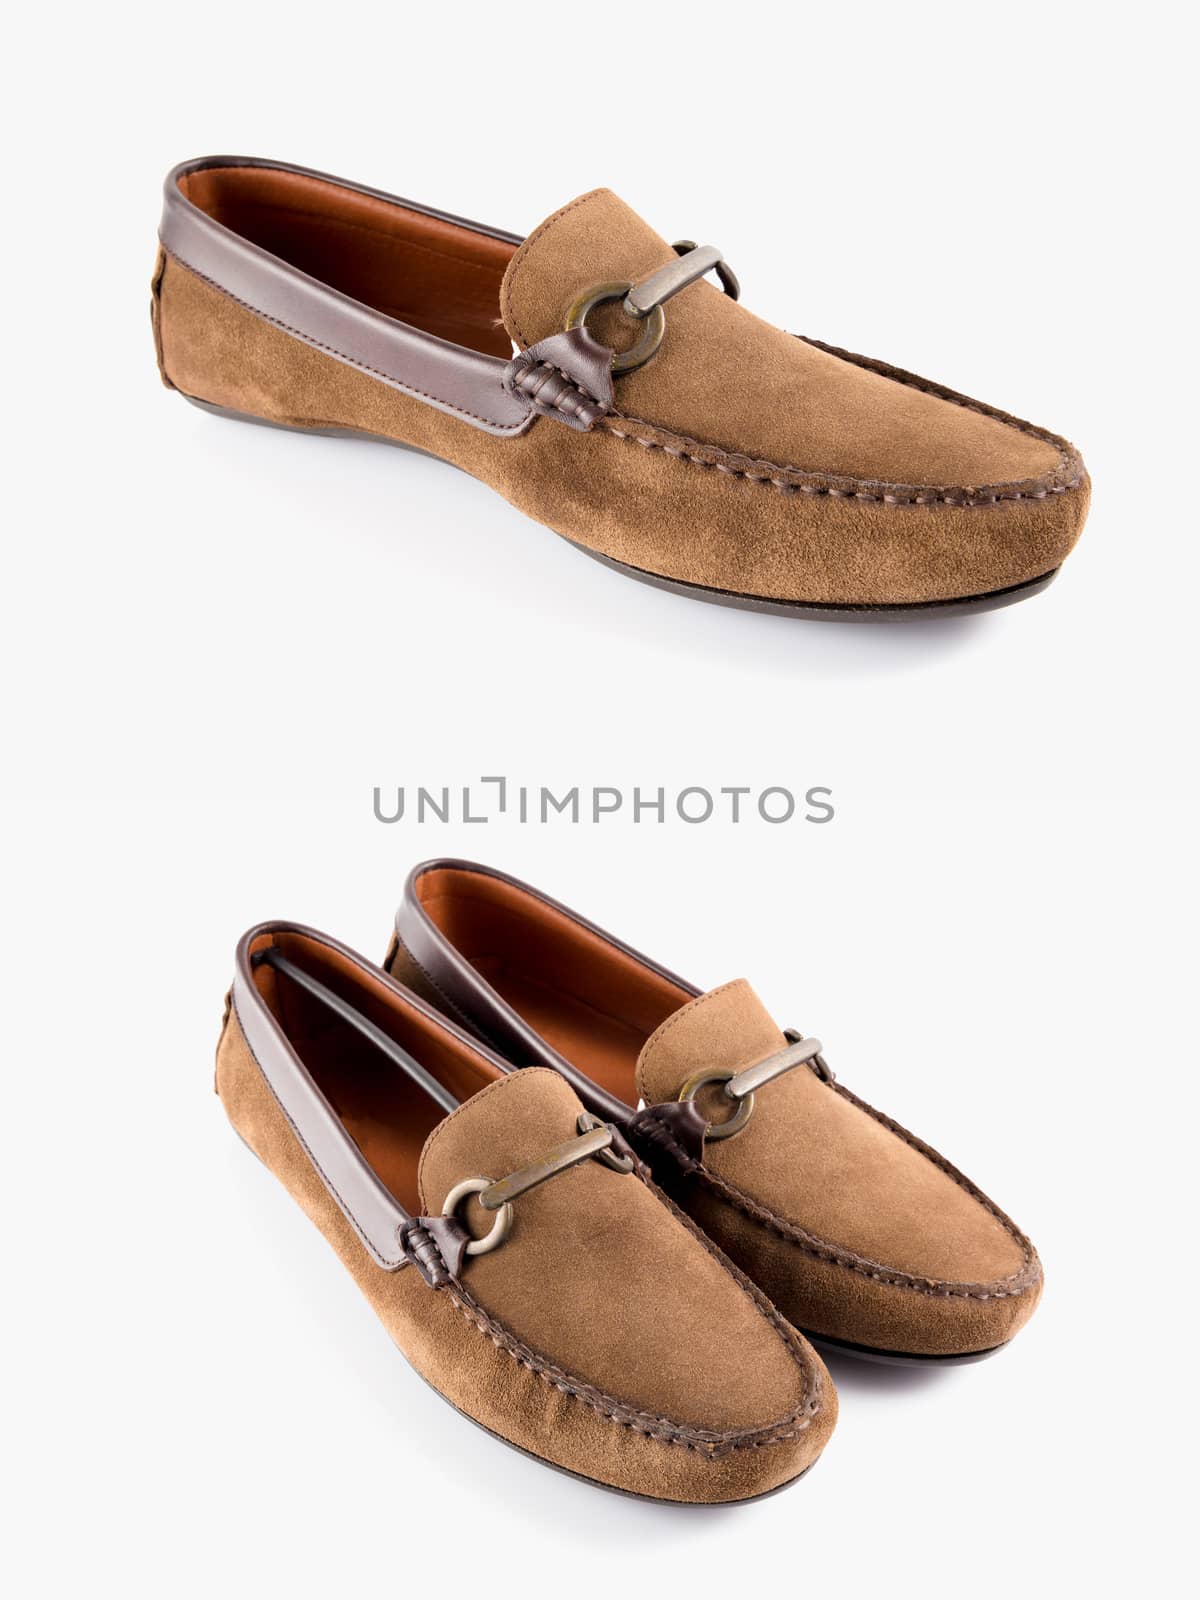 Male brown leather shoes on white background, isolated product. by GeorgeVieiraSilva